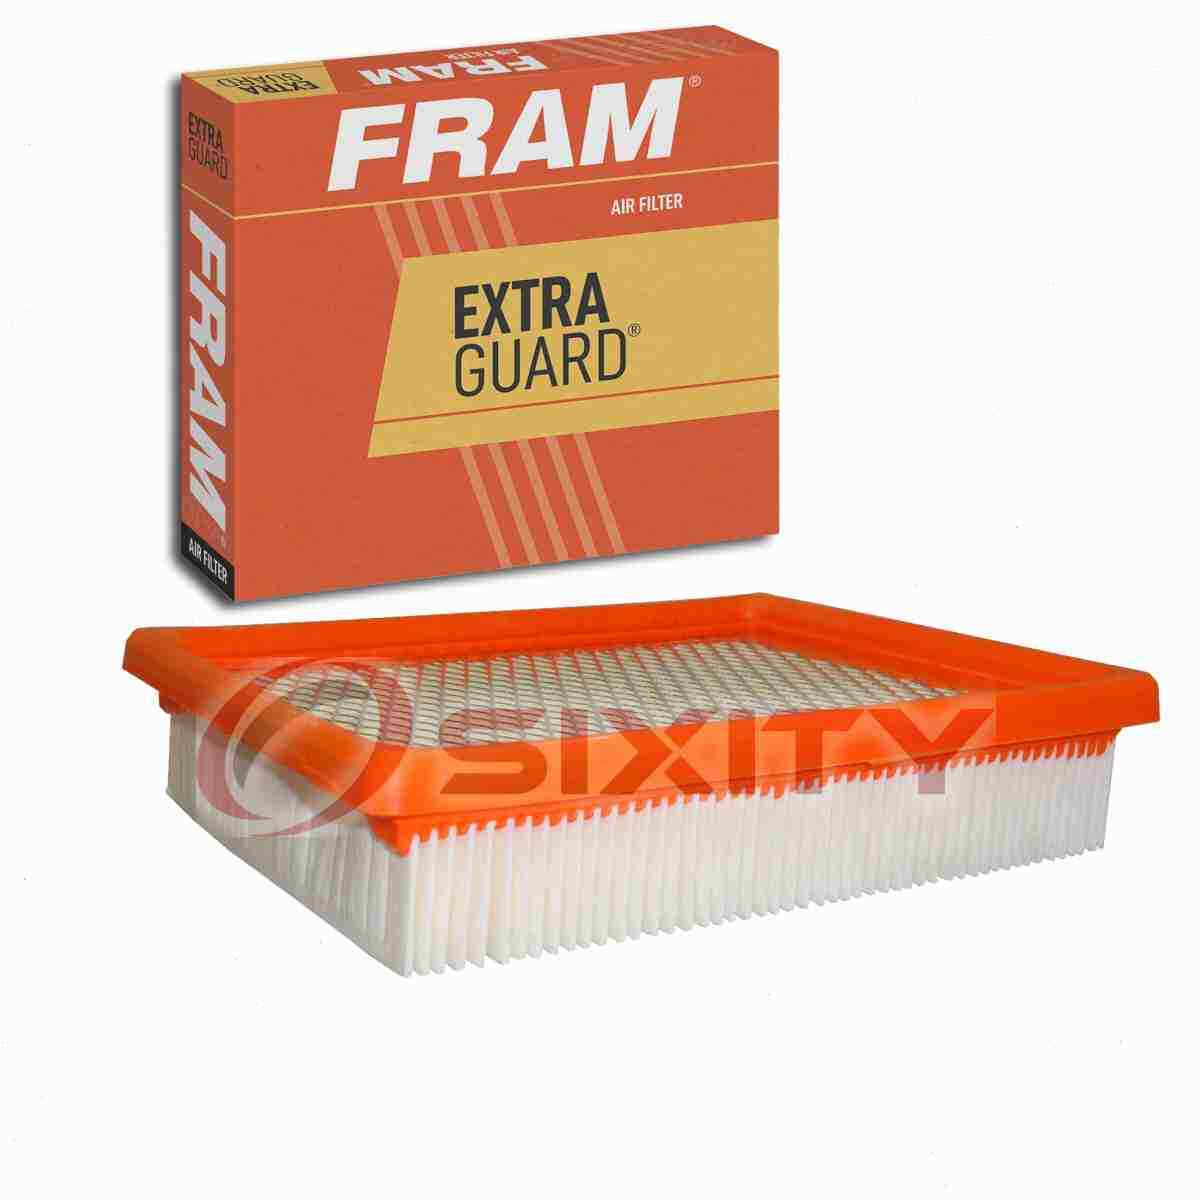 FRAM Extra Guard Air Filter for 1992-1996 Oldsmobile Silhouette Intake Inlet wh